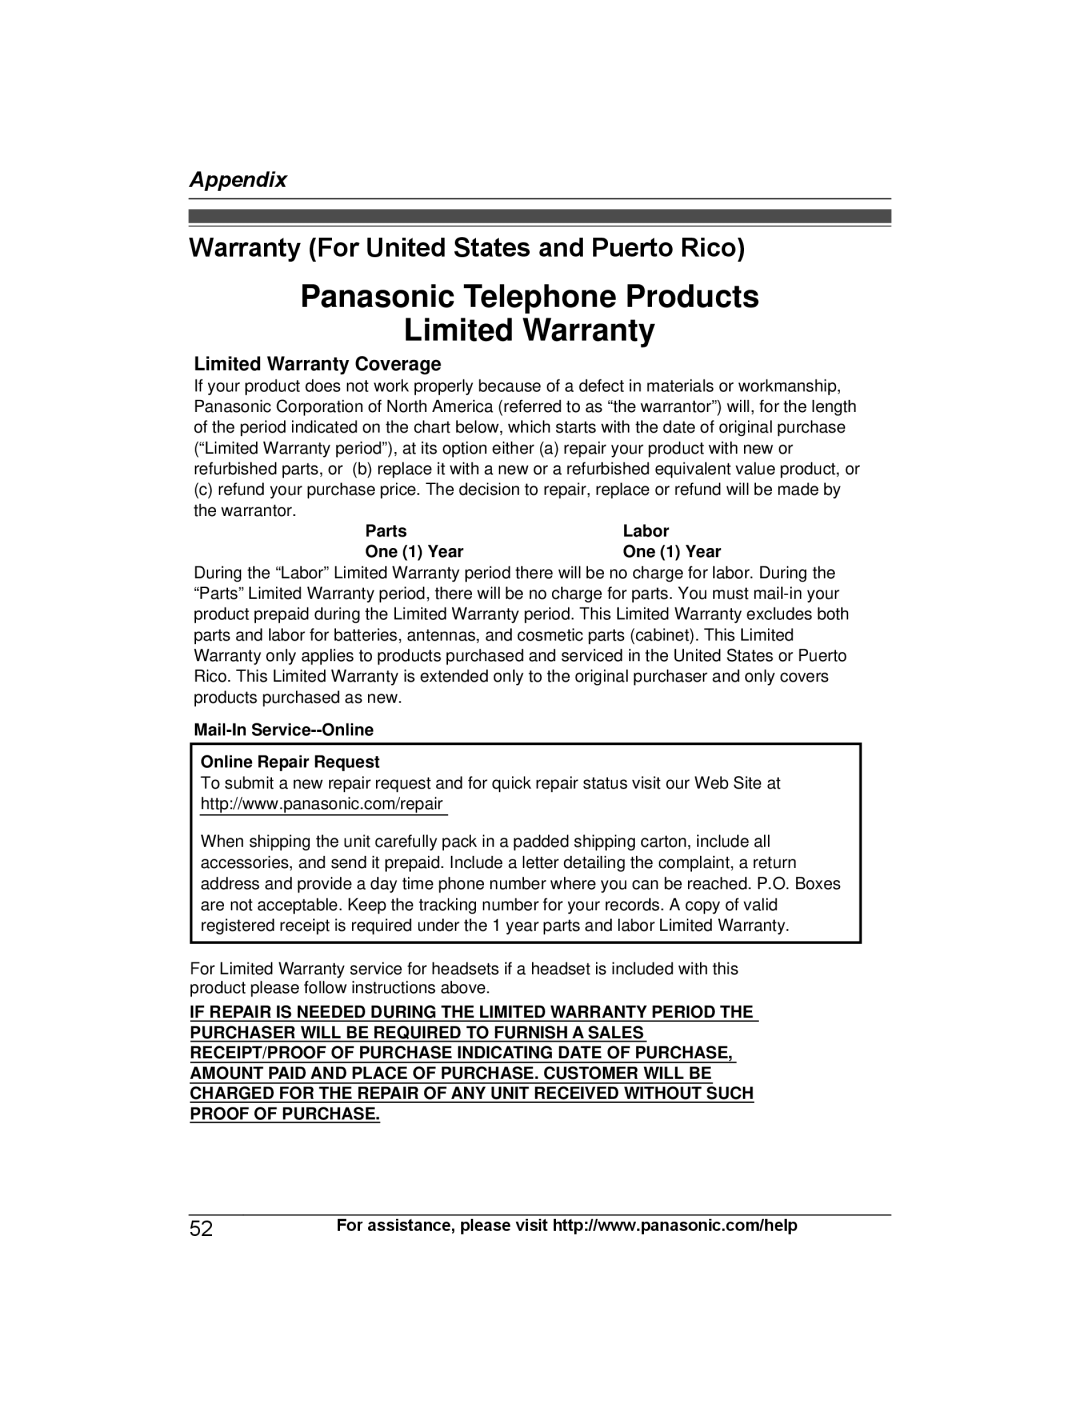 Panasonic KX-TG443SK Panasonic Telephone Products Limited Warranty, Warranty For United States and Puerto Rico, Appendix 